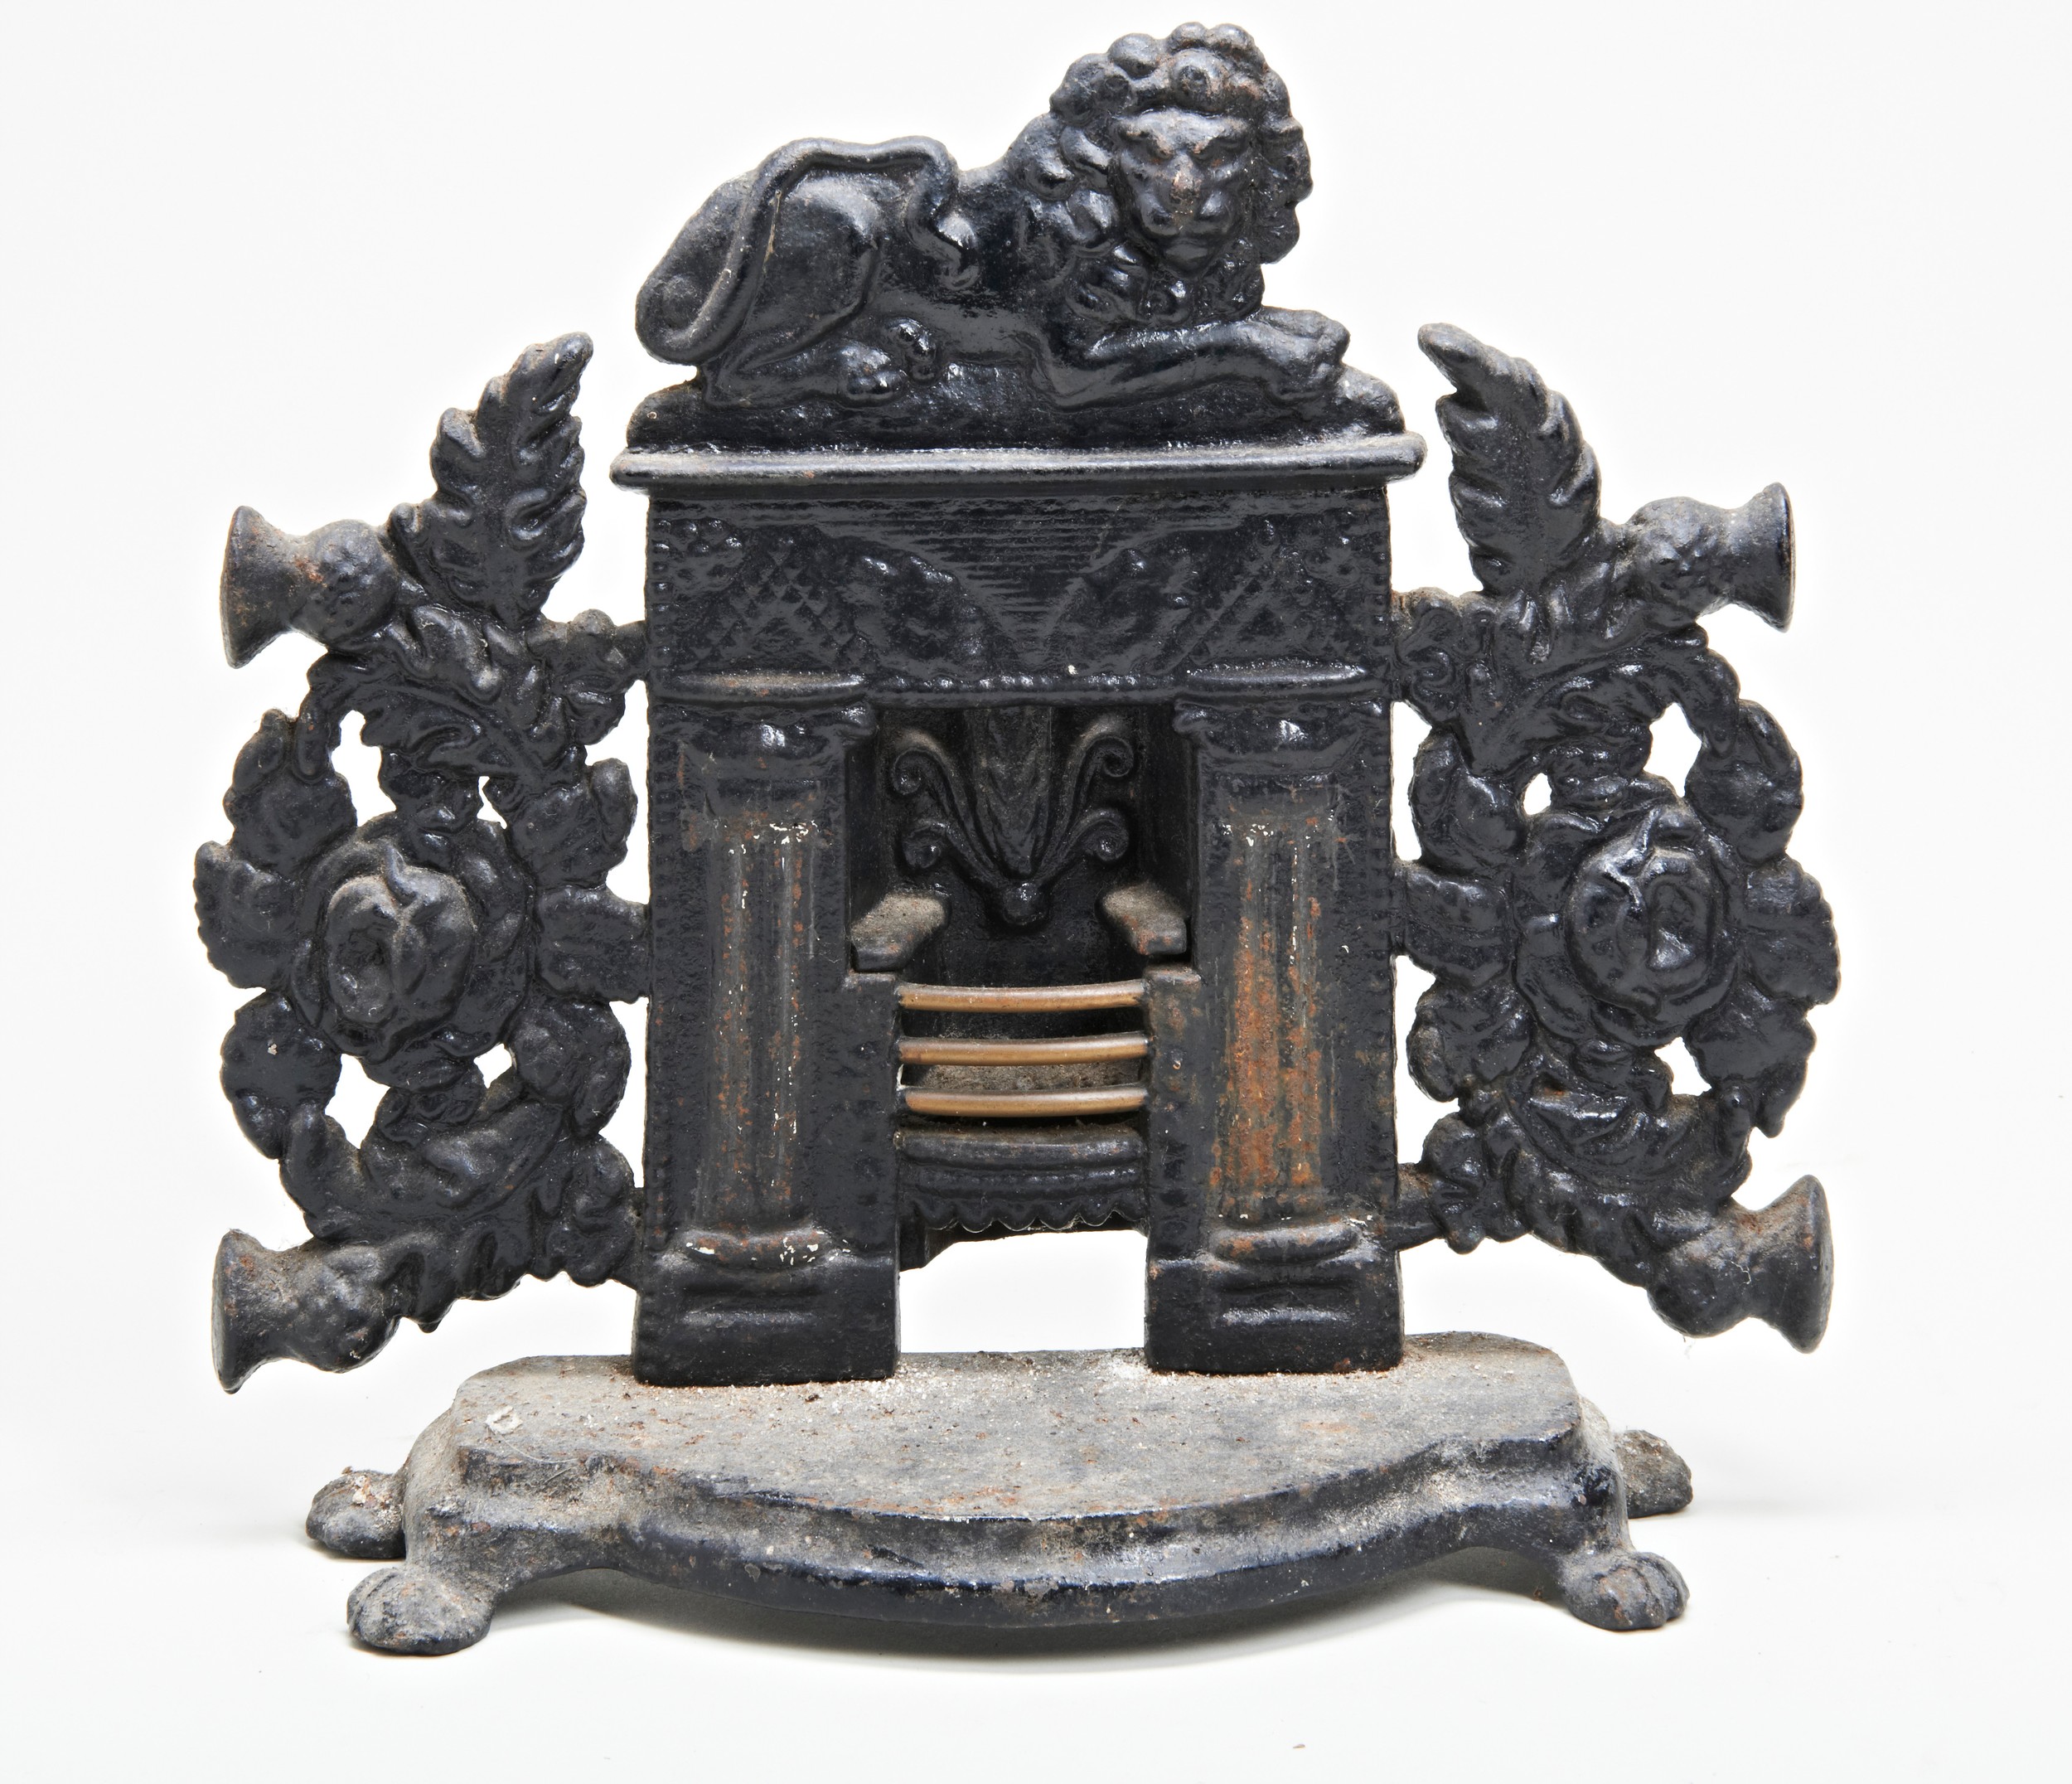 A VICTORIAN CAST IRON DOORSTOP IN THE FORM OF A FIREPLACE, THE GRATE WITH BRASS BARS. 32 x 33cms